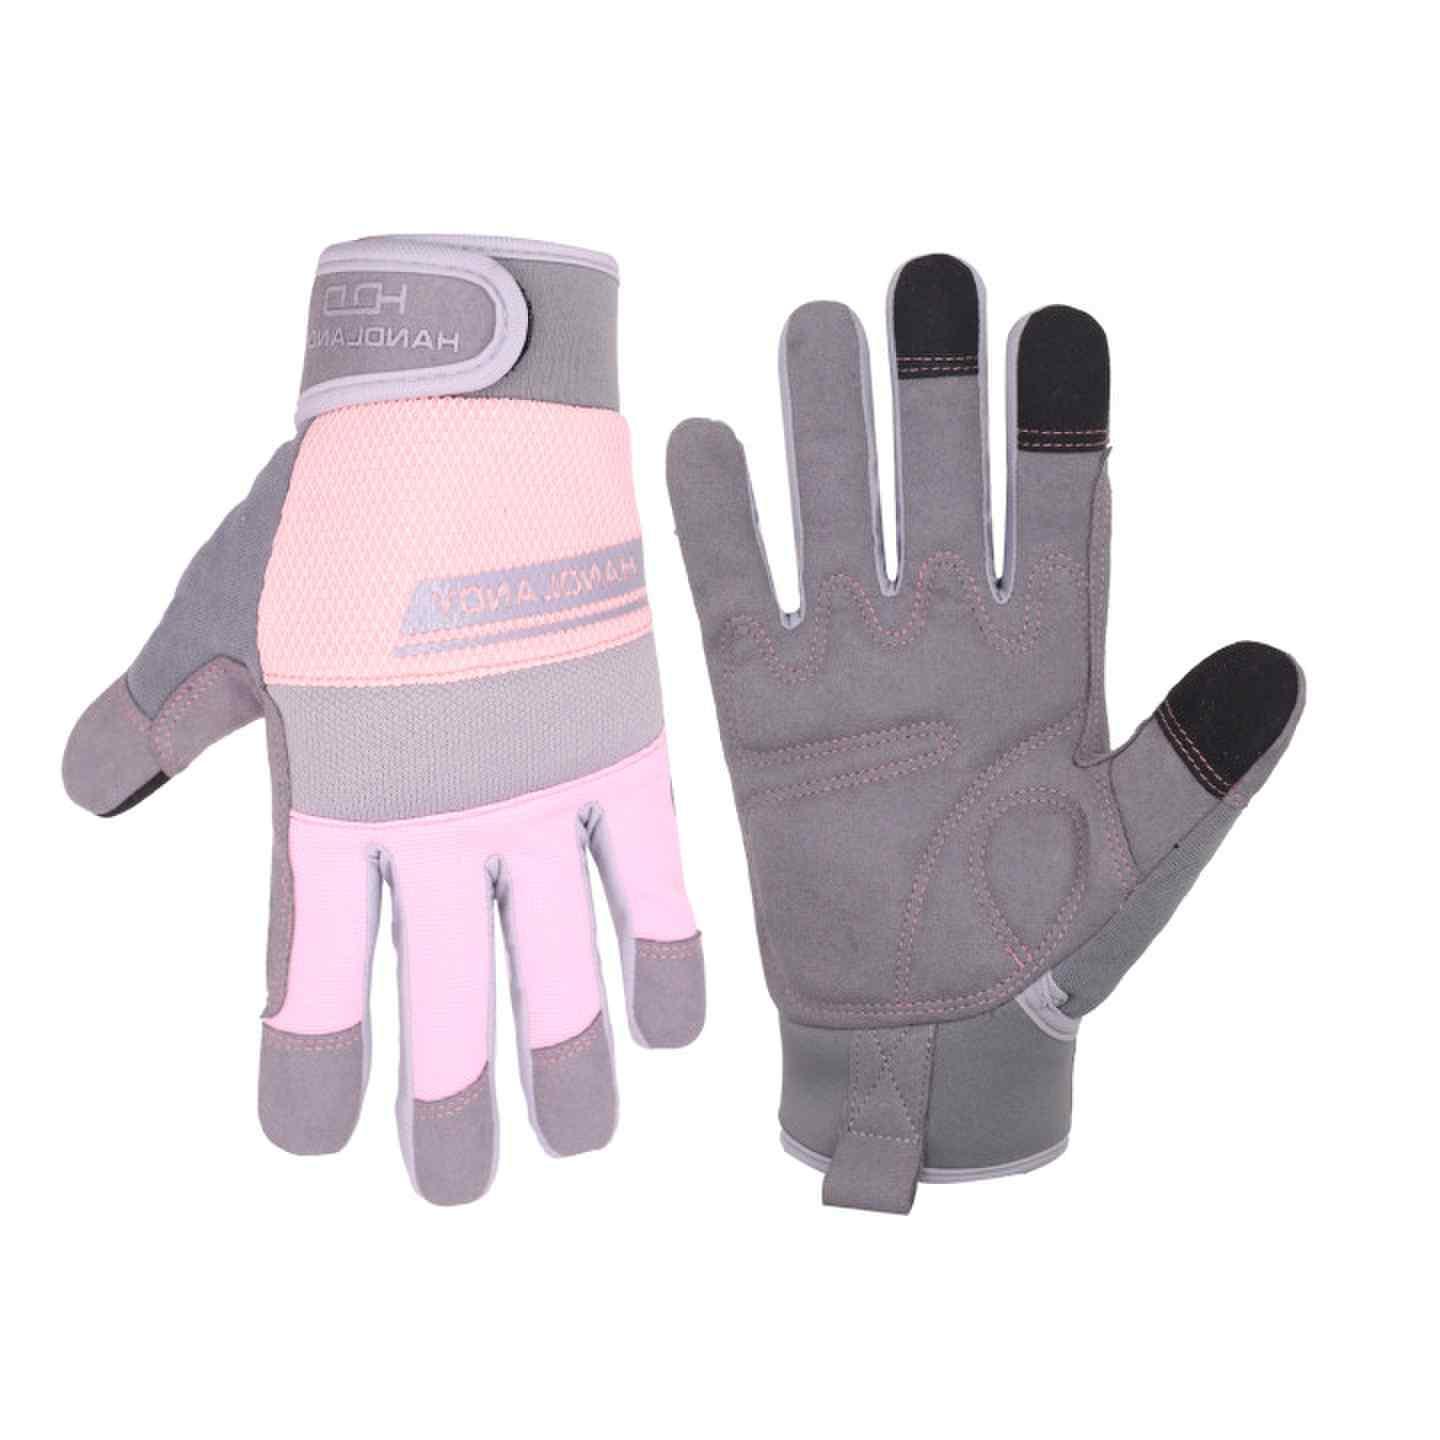 6035GP PRISAFETY Lady Pink Garden Light duty gloves Farm Yark Utility Mechanic working protective gardening Gloves for Women